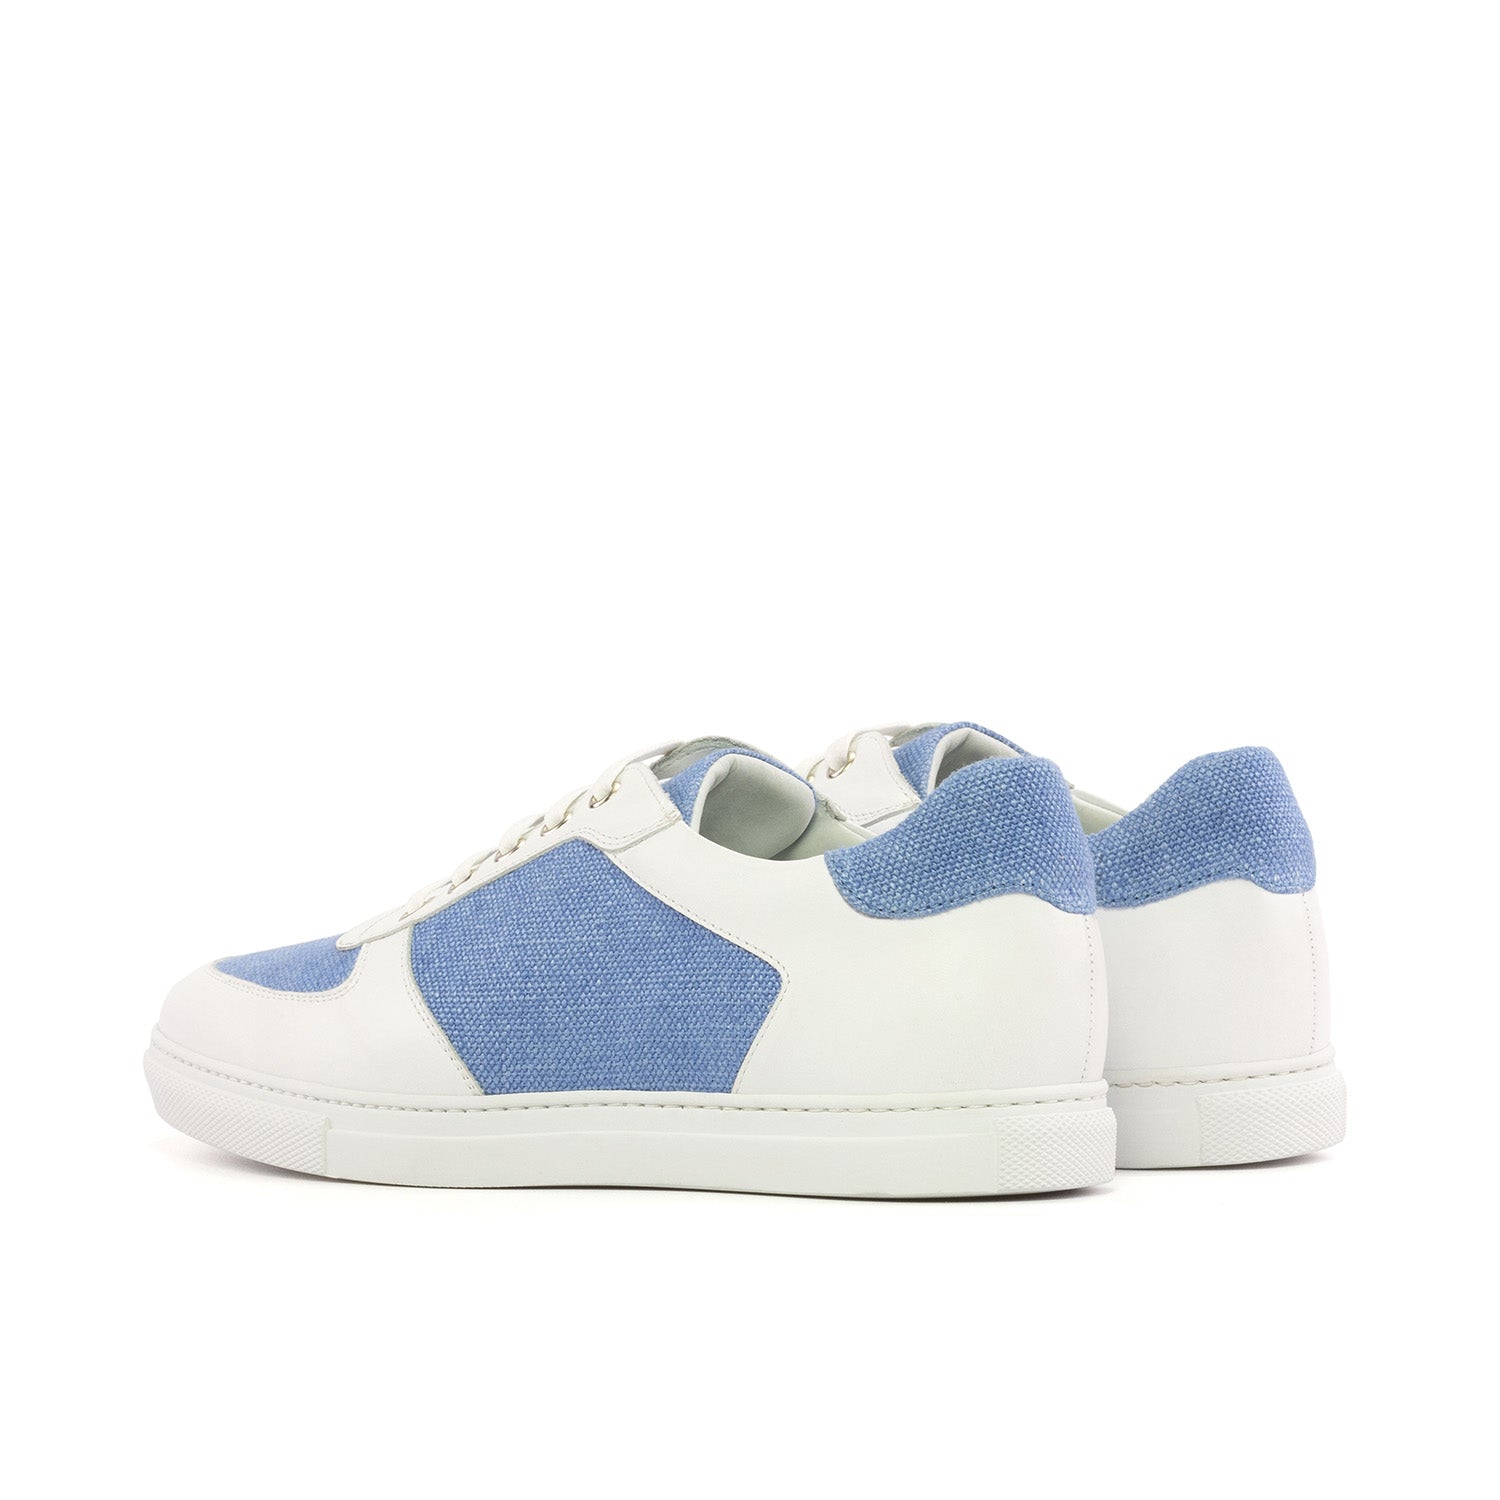 Ambrogio Bespoke Custom Men's Shoes White & Navy Calf-Skin Leather Stencil Trainer Sneakers (AMB2223)